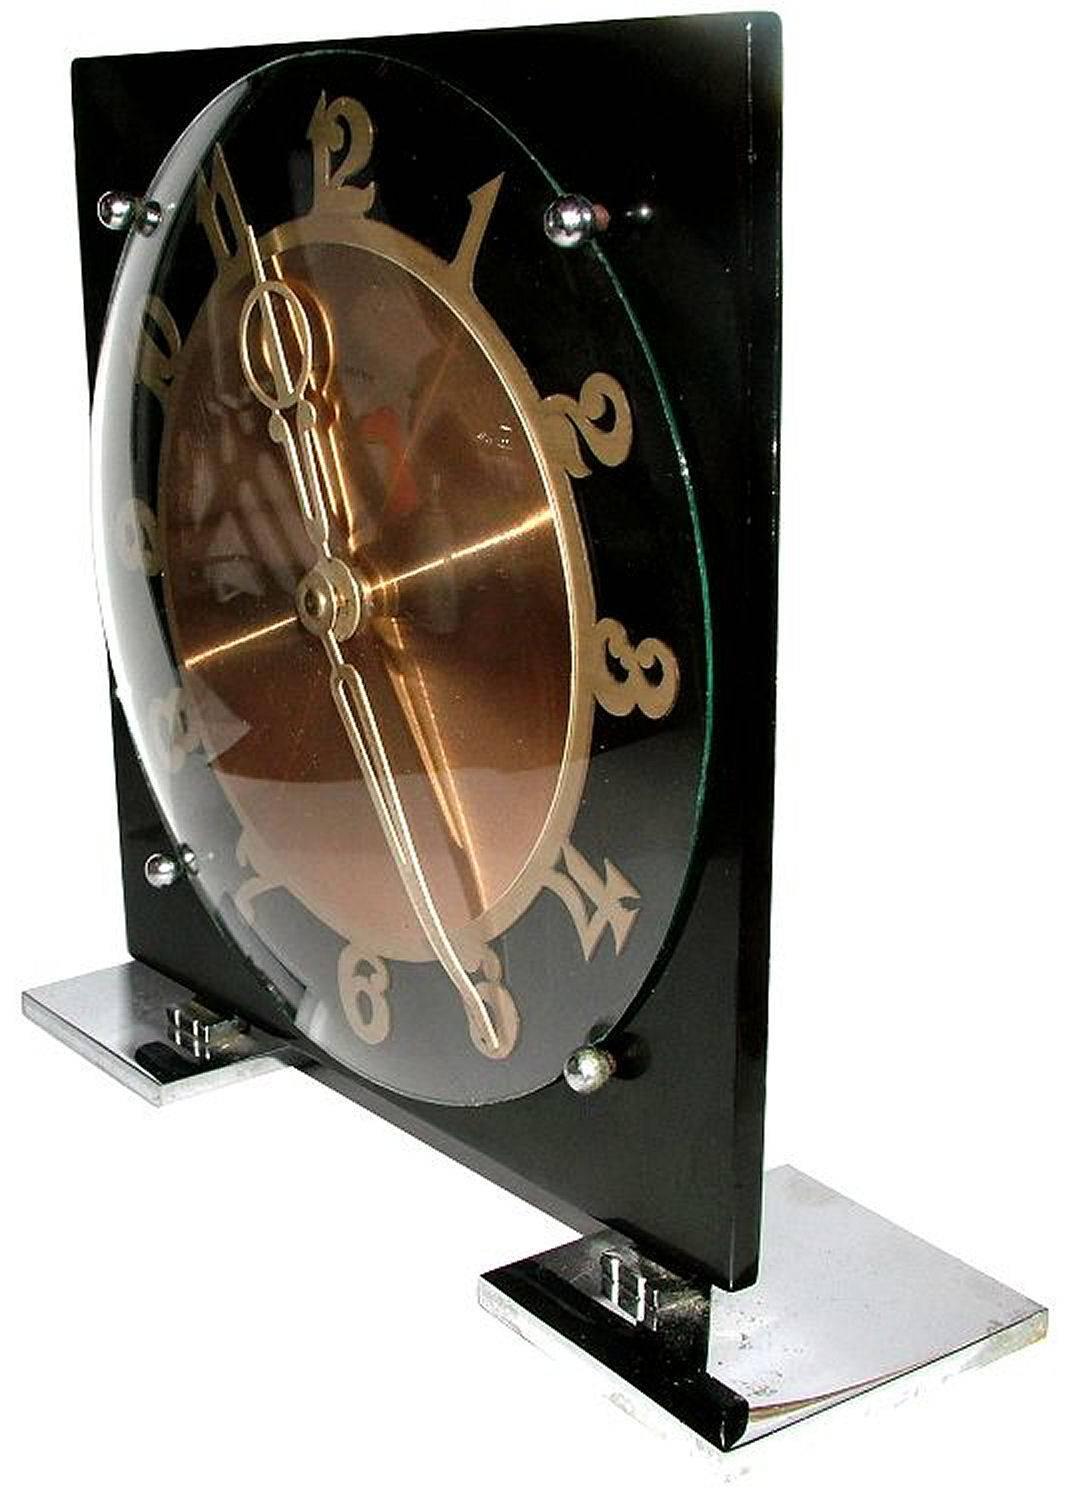 Very attractive 1930s Art Deco English modernist clock by Temco. Features a chrome back and feet with early plastic black face with gilt numerals and central dial. Very distinctive looking clock, a fabulous timepiece for any setting or room.